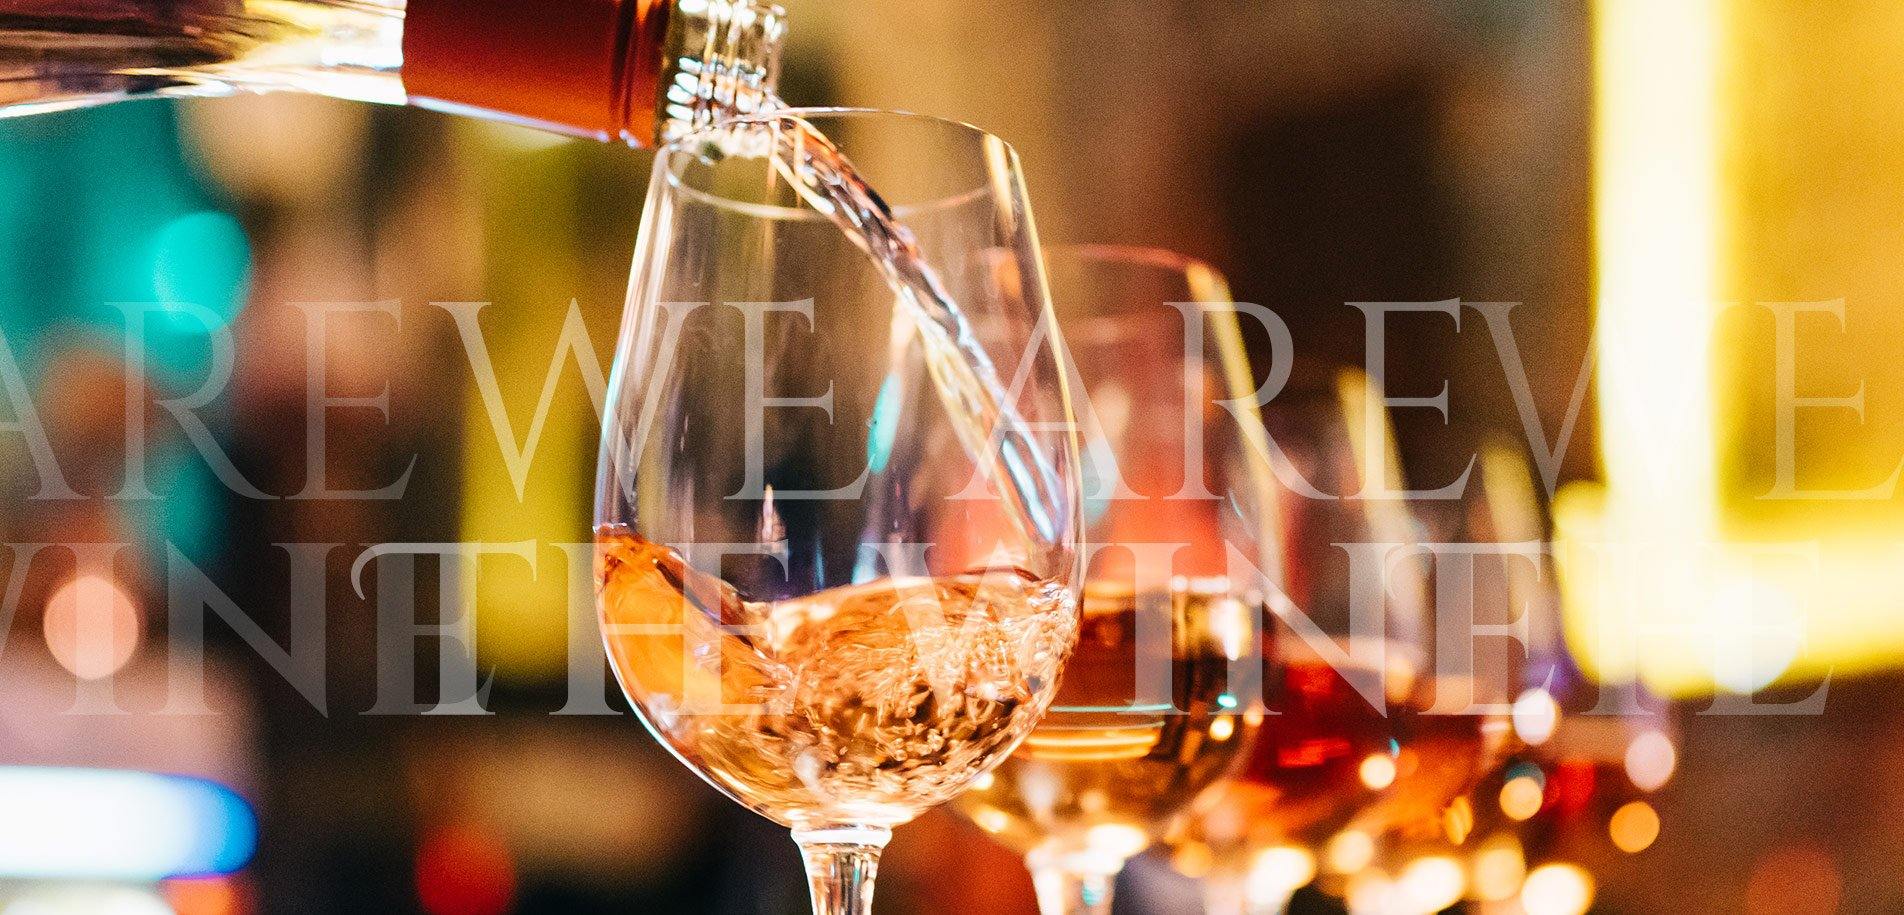 Wine the We are best – The